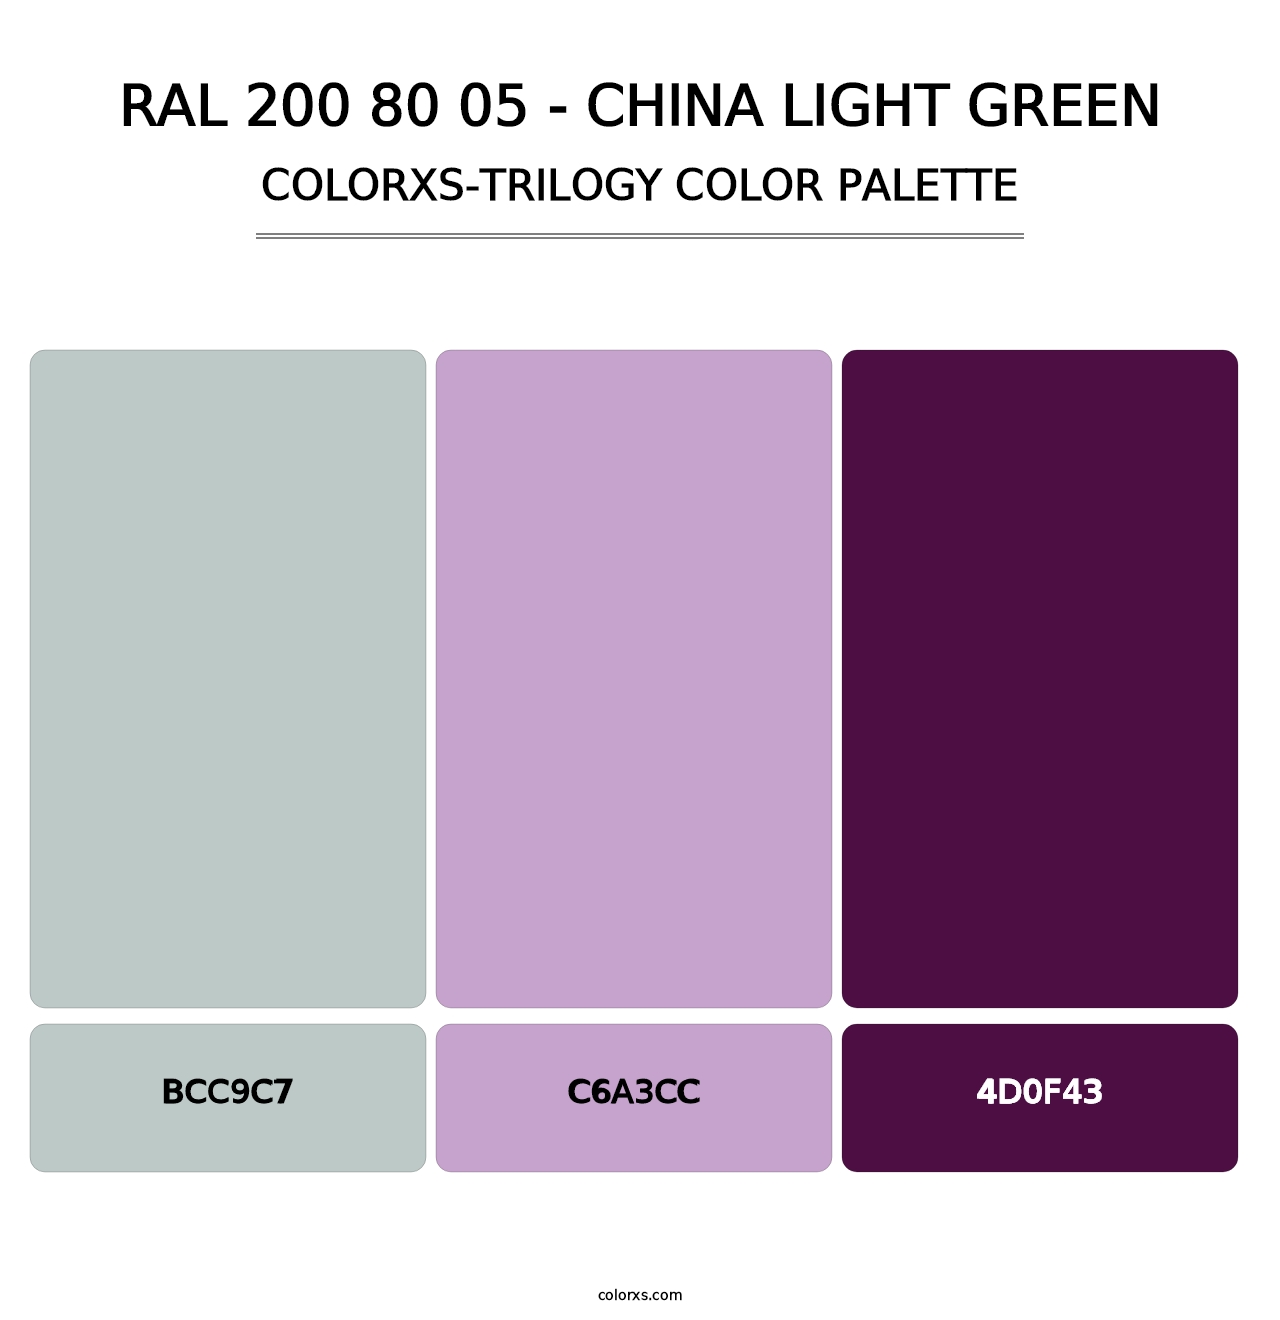 RAL 200 80 05 - China Light Green - Colorxs Trilogy Palette